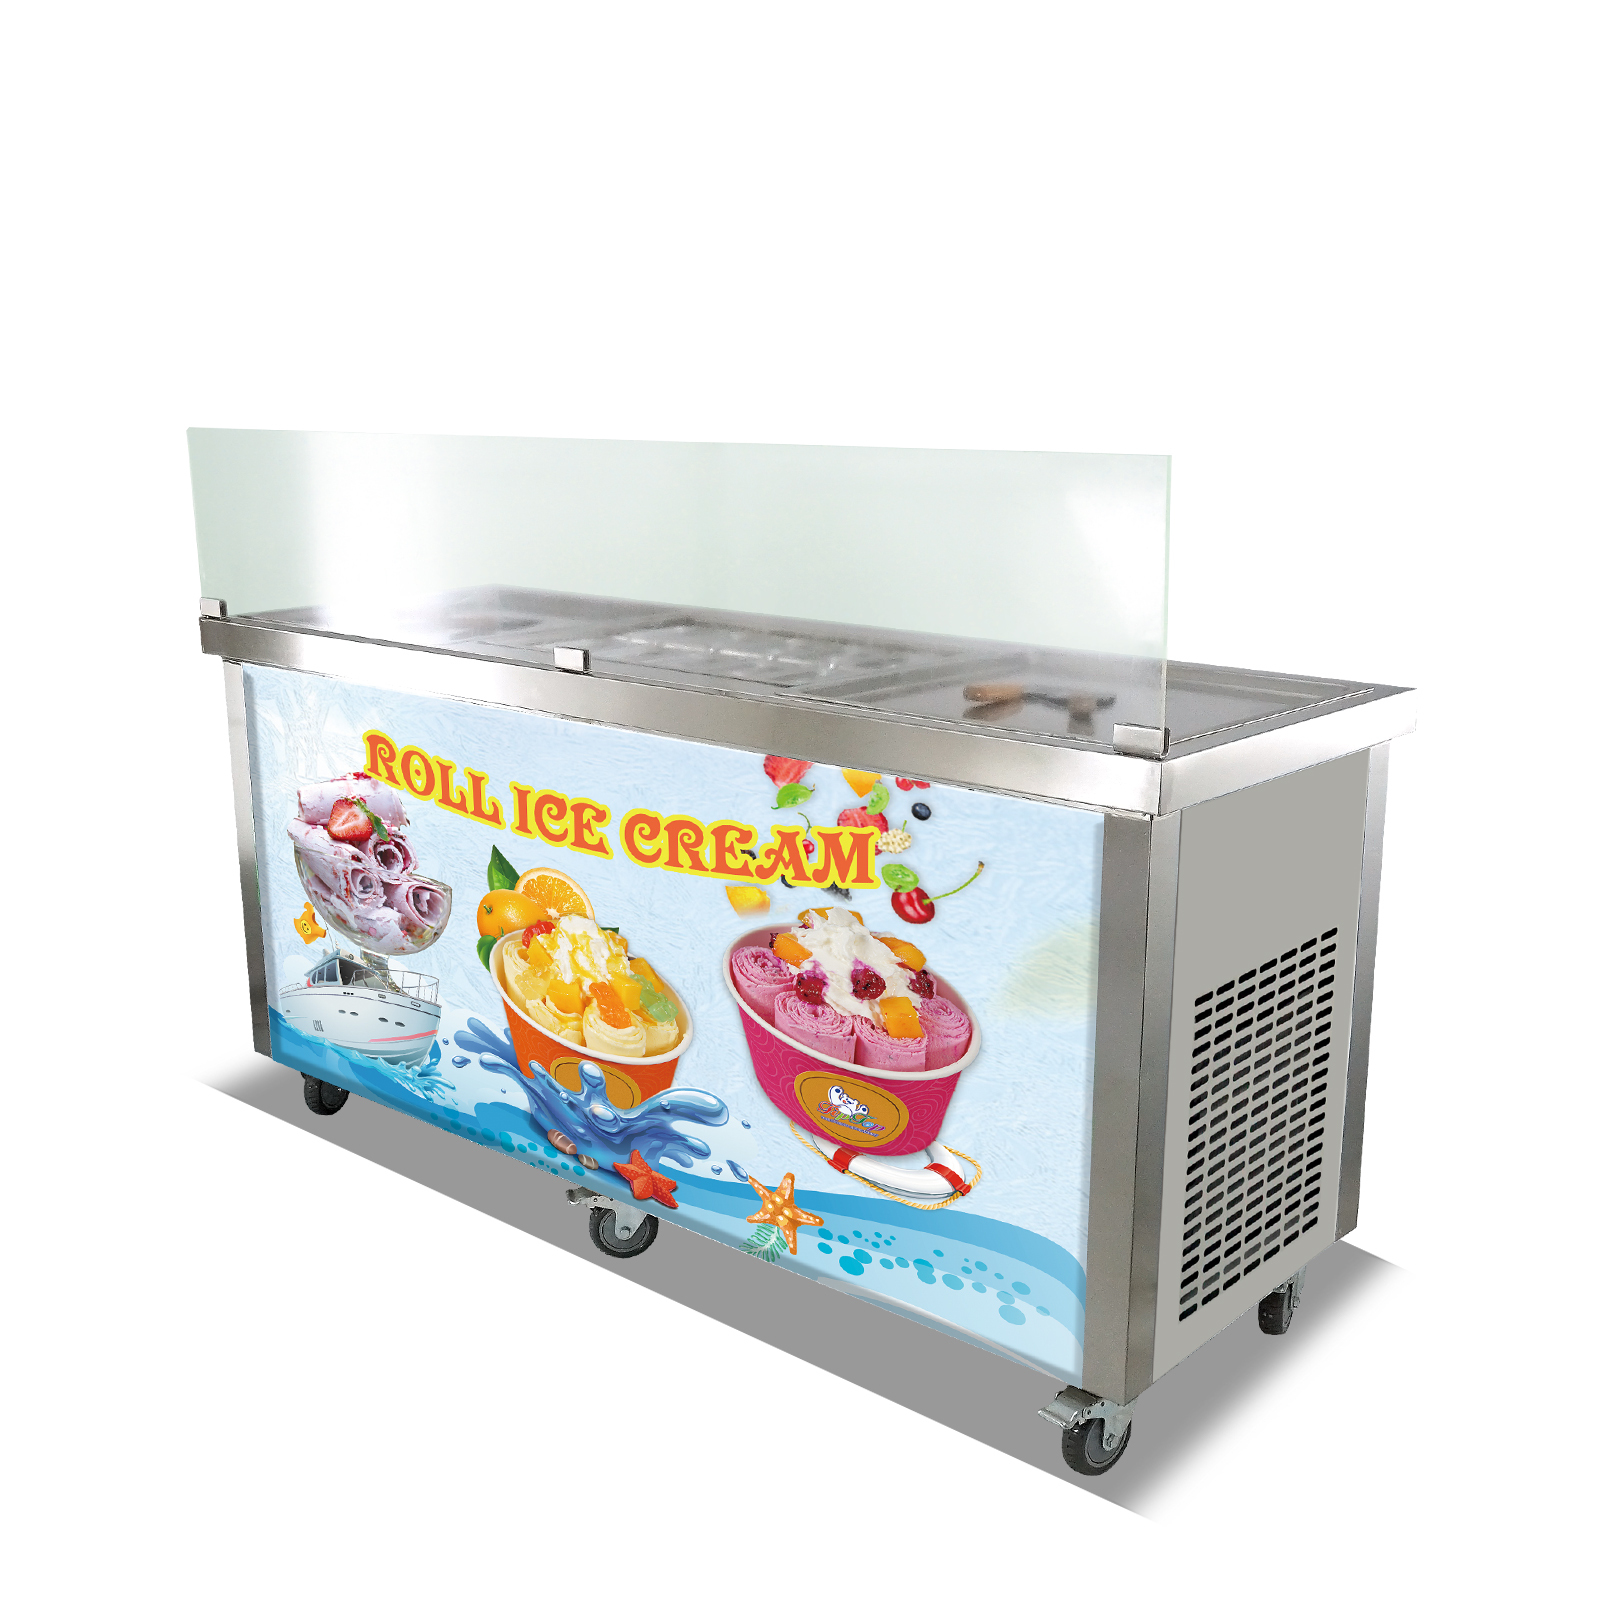 https://images.51microshop.com/4053/product/20220121/Free_Shipment_to_USA_Commercial_Double_square_pans_fried_ice_cream_machine_thai_stir_roll_ice_cream_roll_machine_with_10_refrigerated_tanks_1642755717833_1.jpg